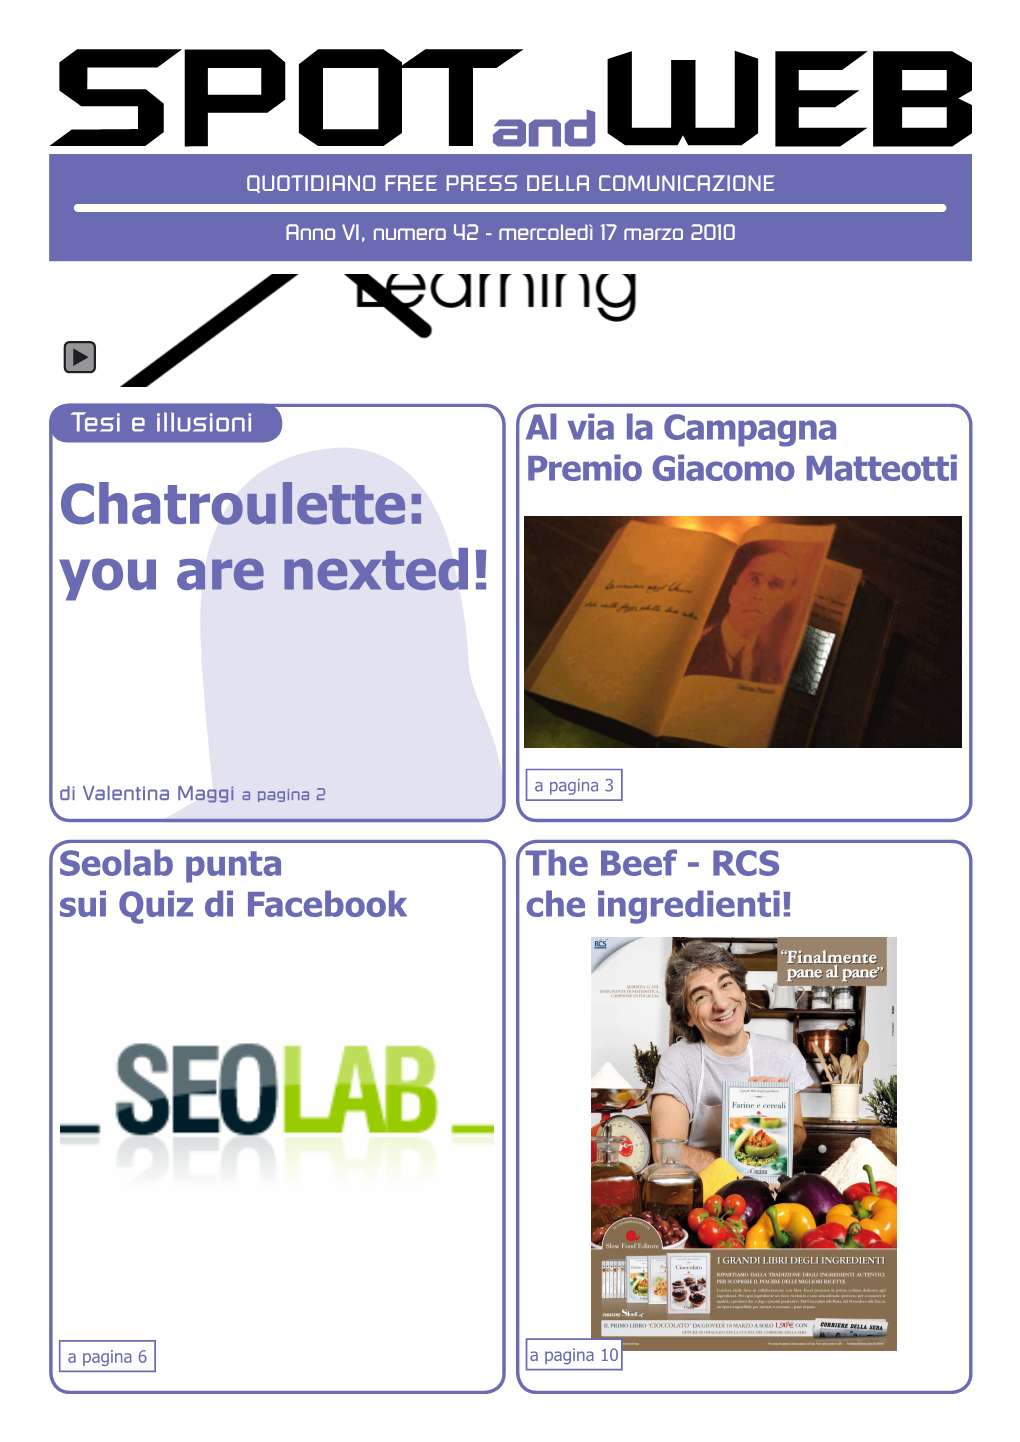 Chatroulette: You Are Nexted!